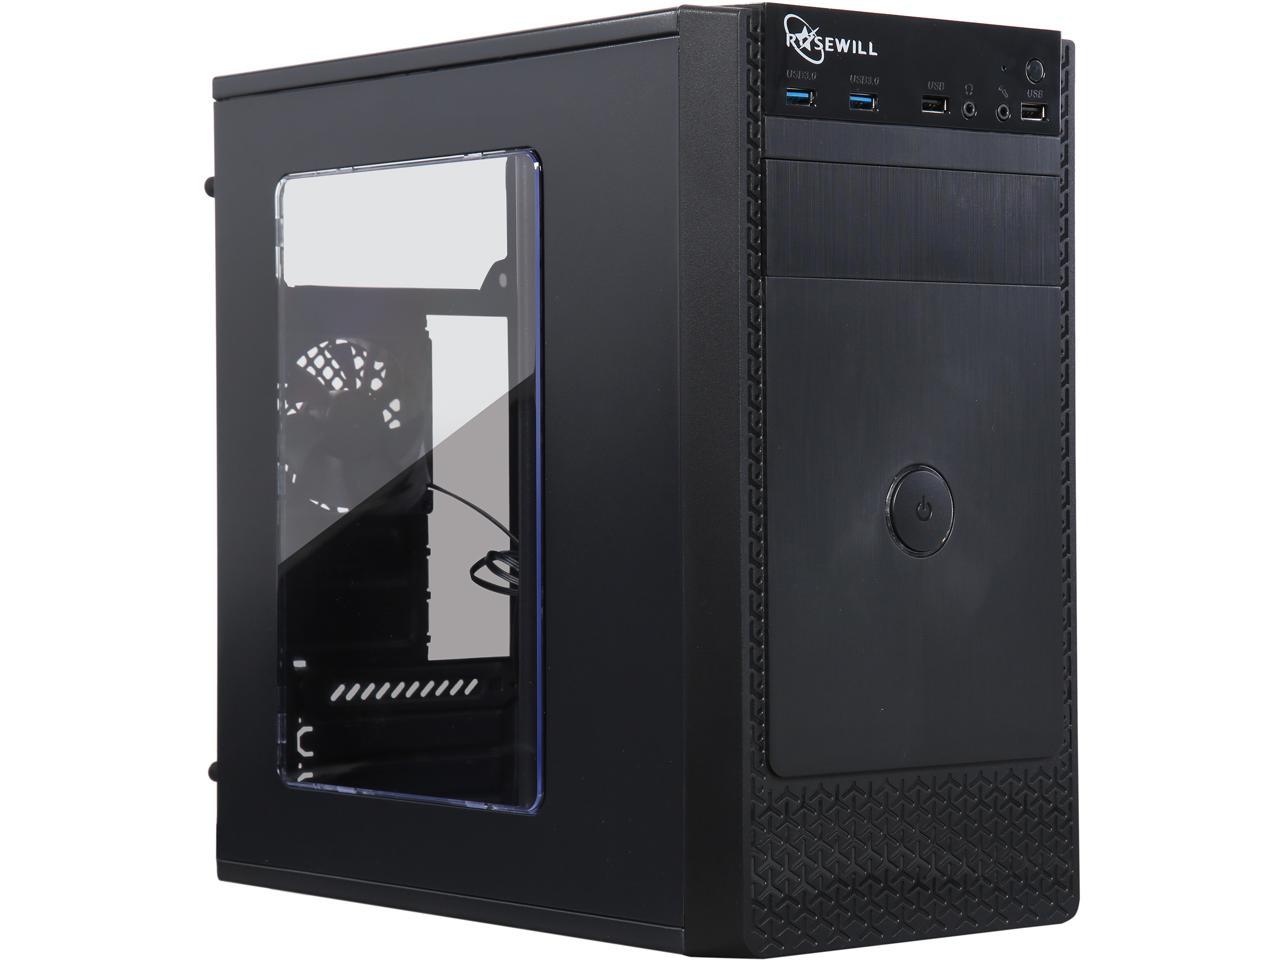 Rosewill FBM-X1 Black Steel / Plastic Mini Tower Case with Side Panel Window